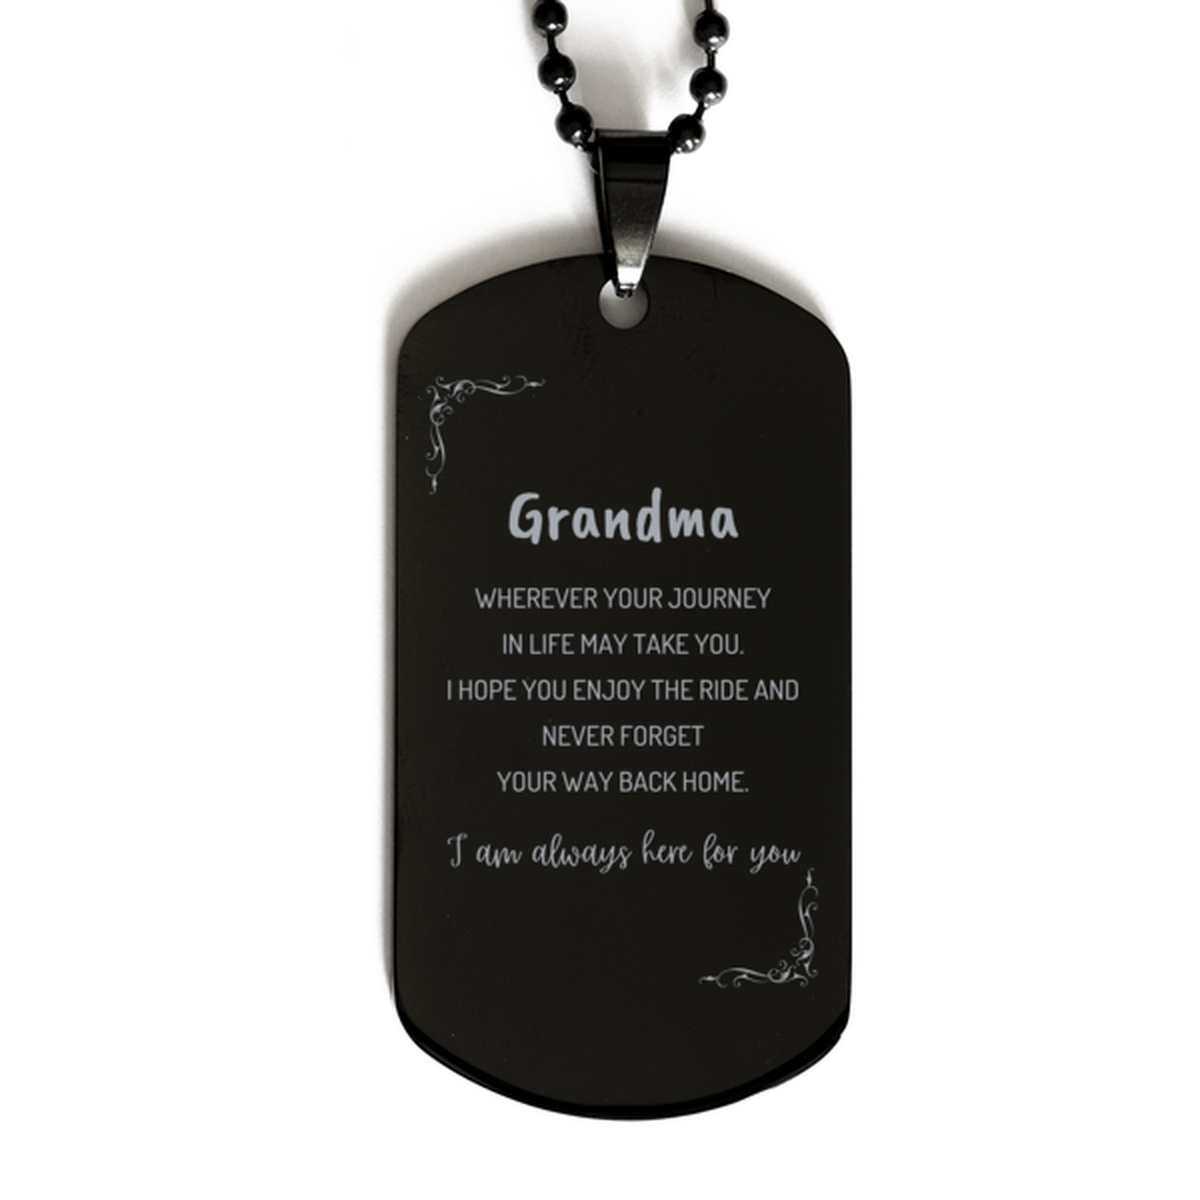 Grandma wherever your journey in life may take you, I am always here for you Grandma Black Dog Tag, Awesome Christmas Gifts For Grandma, Grandma Birthday Gifts for Men Women Family Loved One